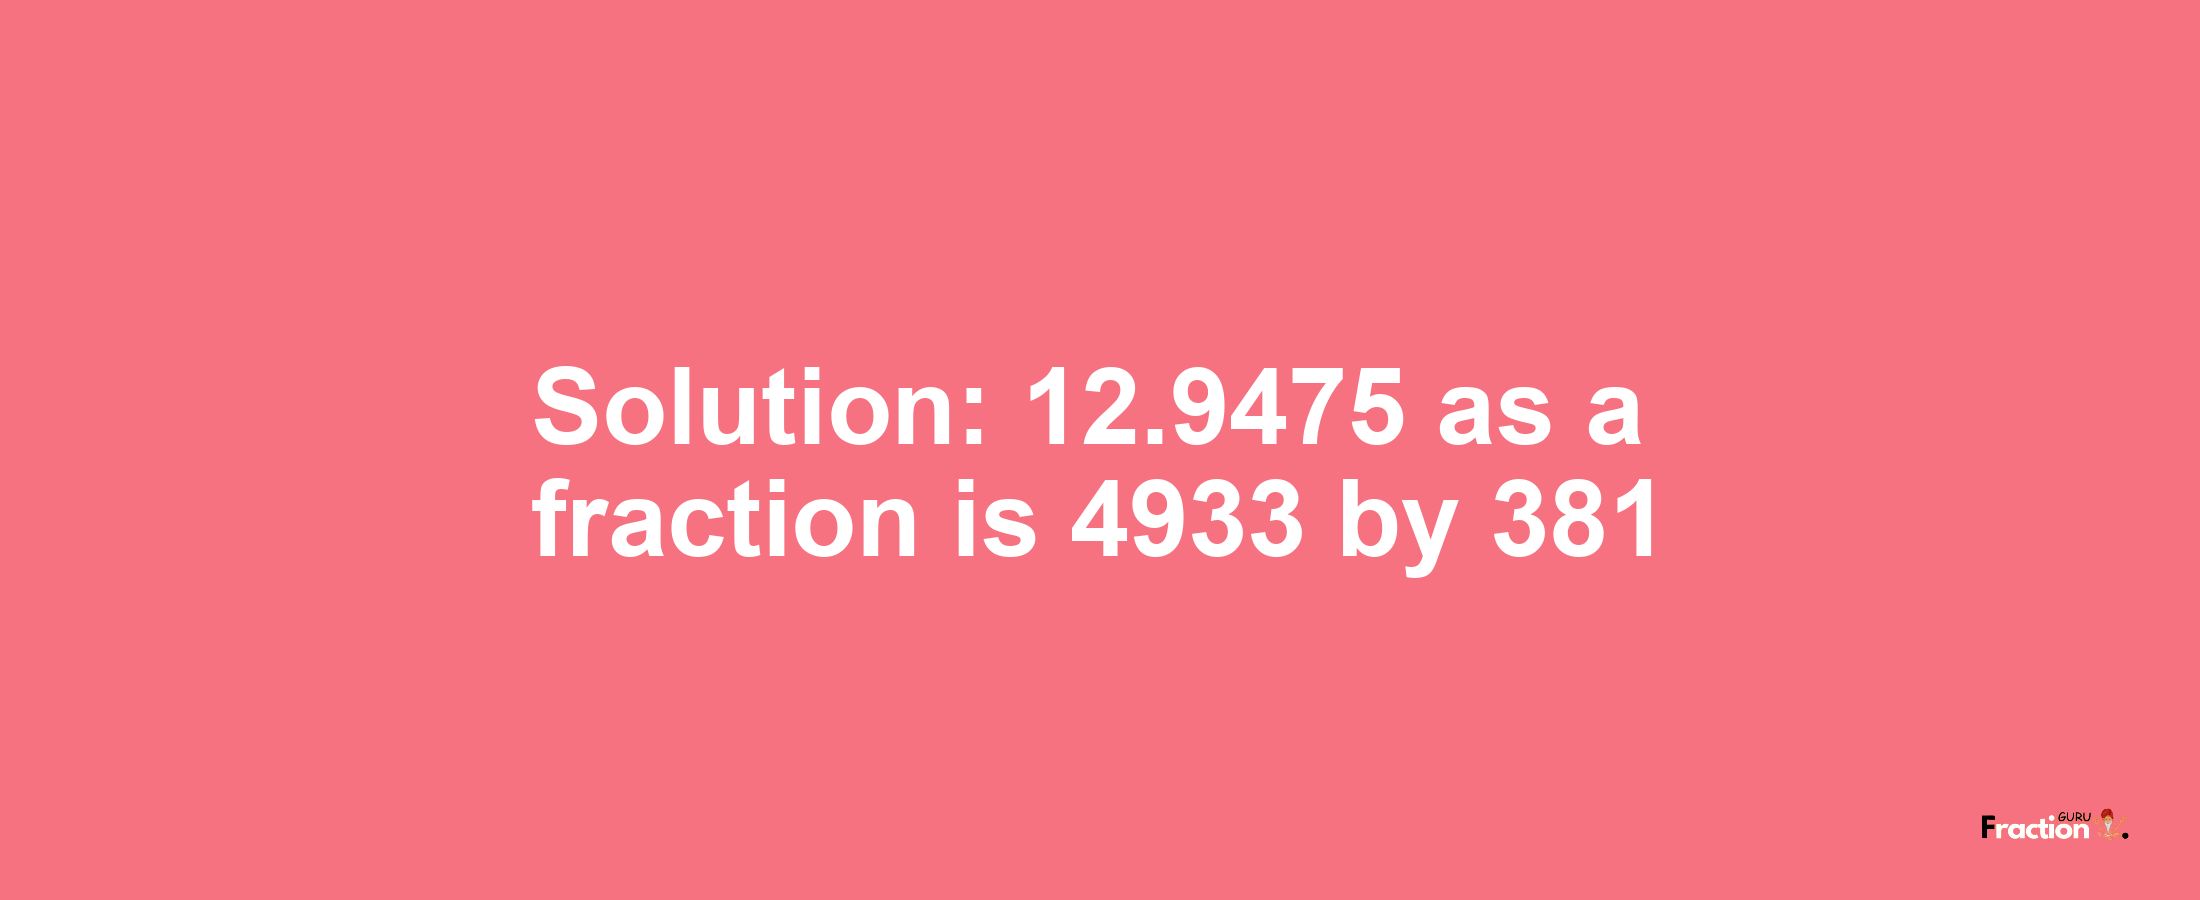 Solution:12.9475 as a fraction is 4933/381